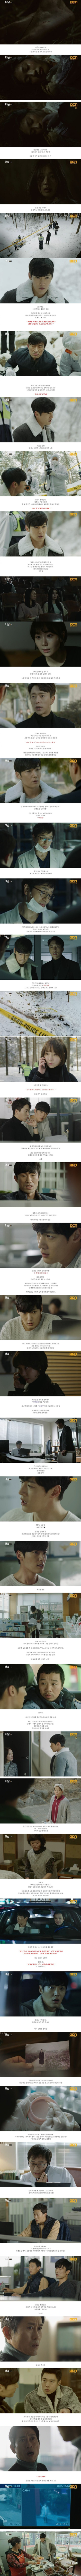 episodes 3 and 4 captures for the Korean drama 'Tunnel - Drama'